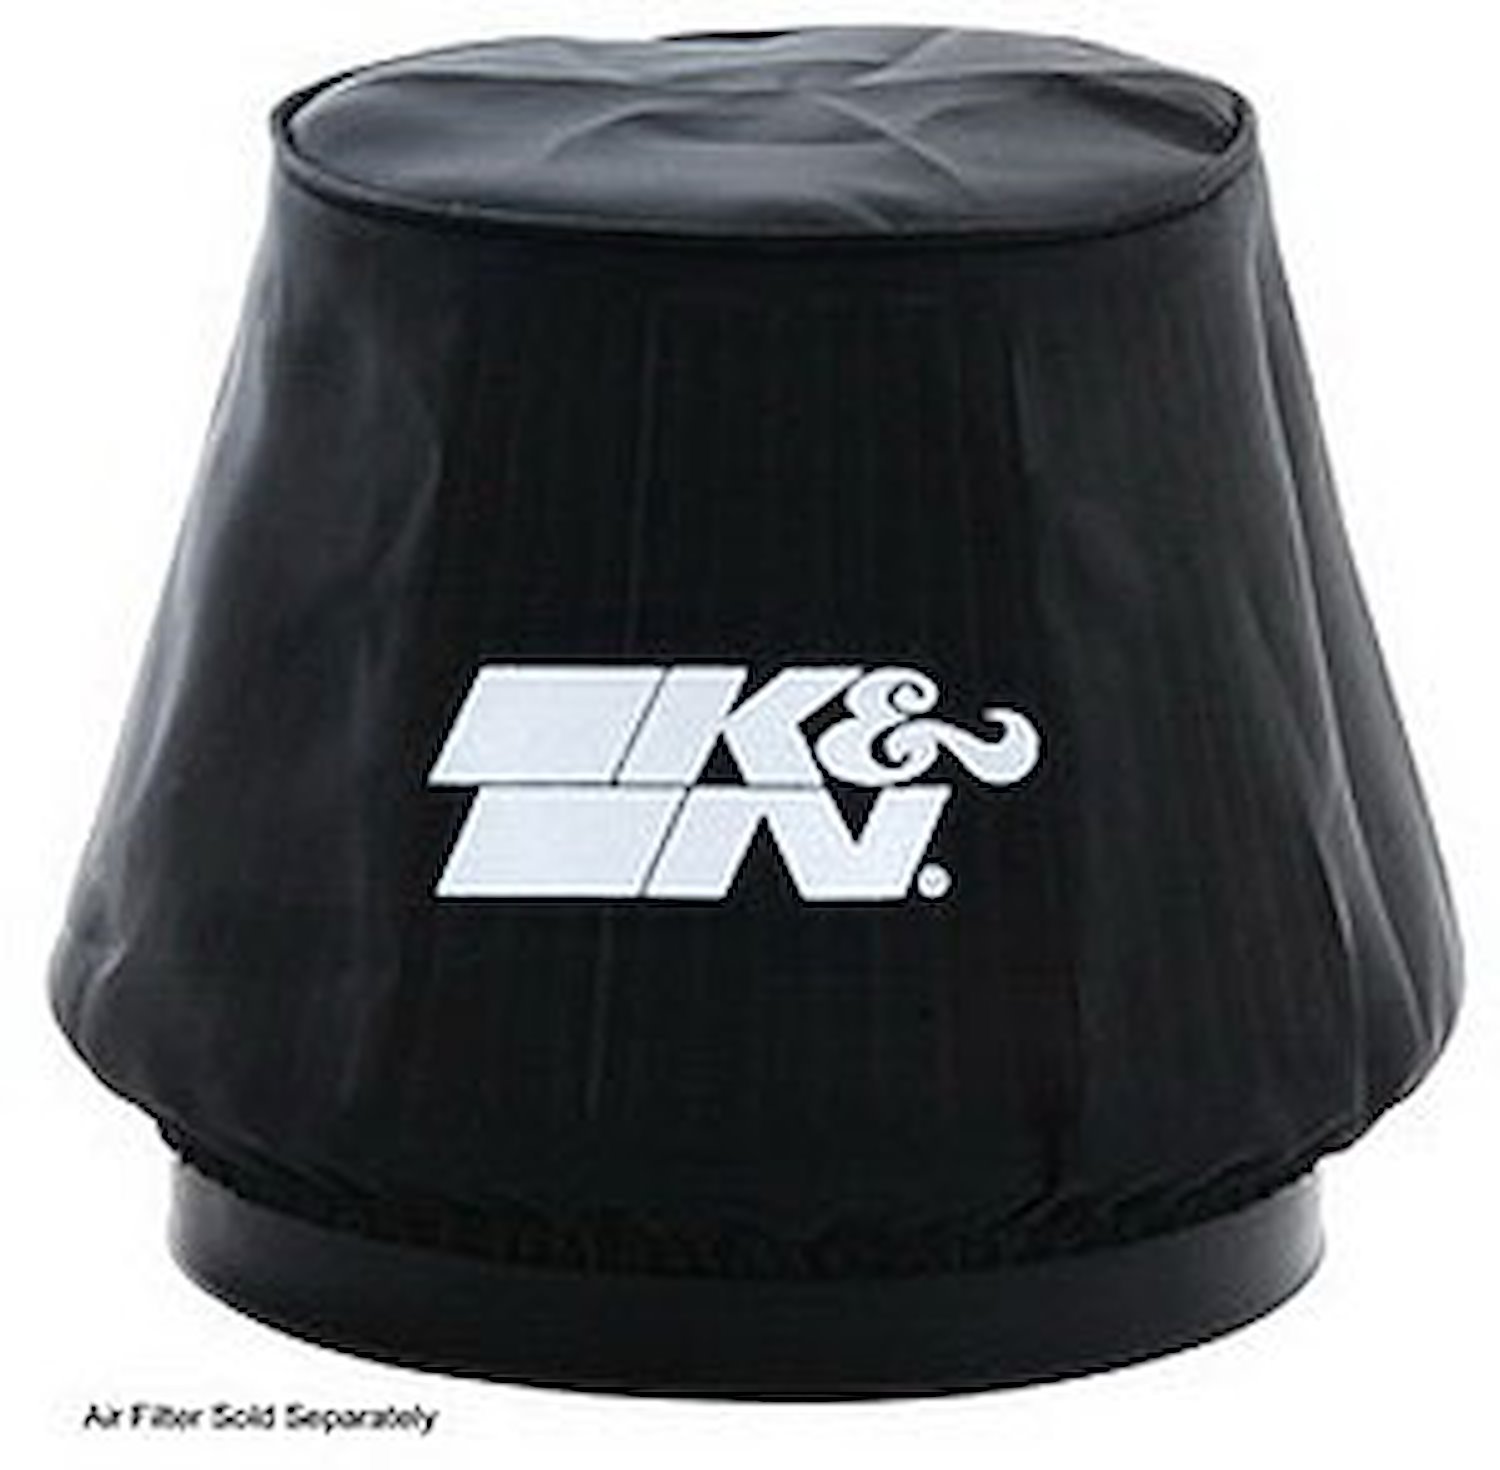 DryCharger Filter Wrap Black